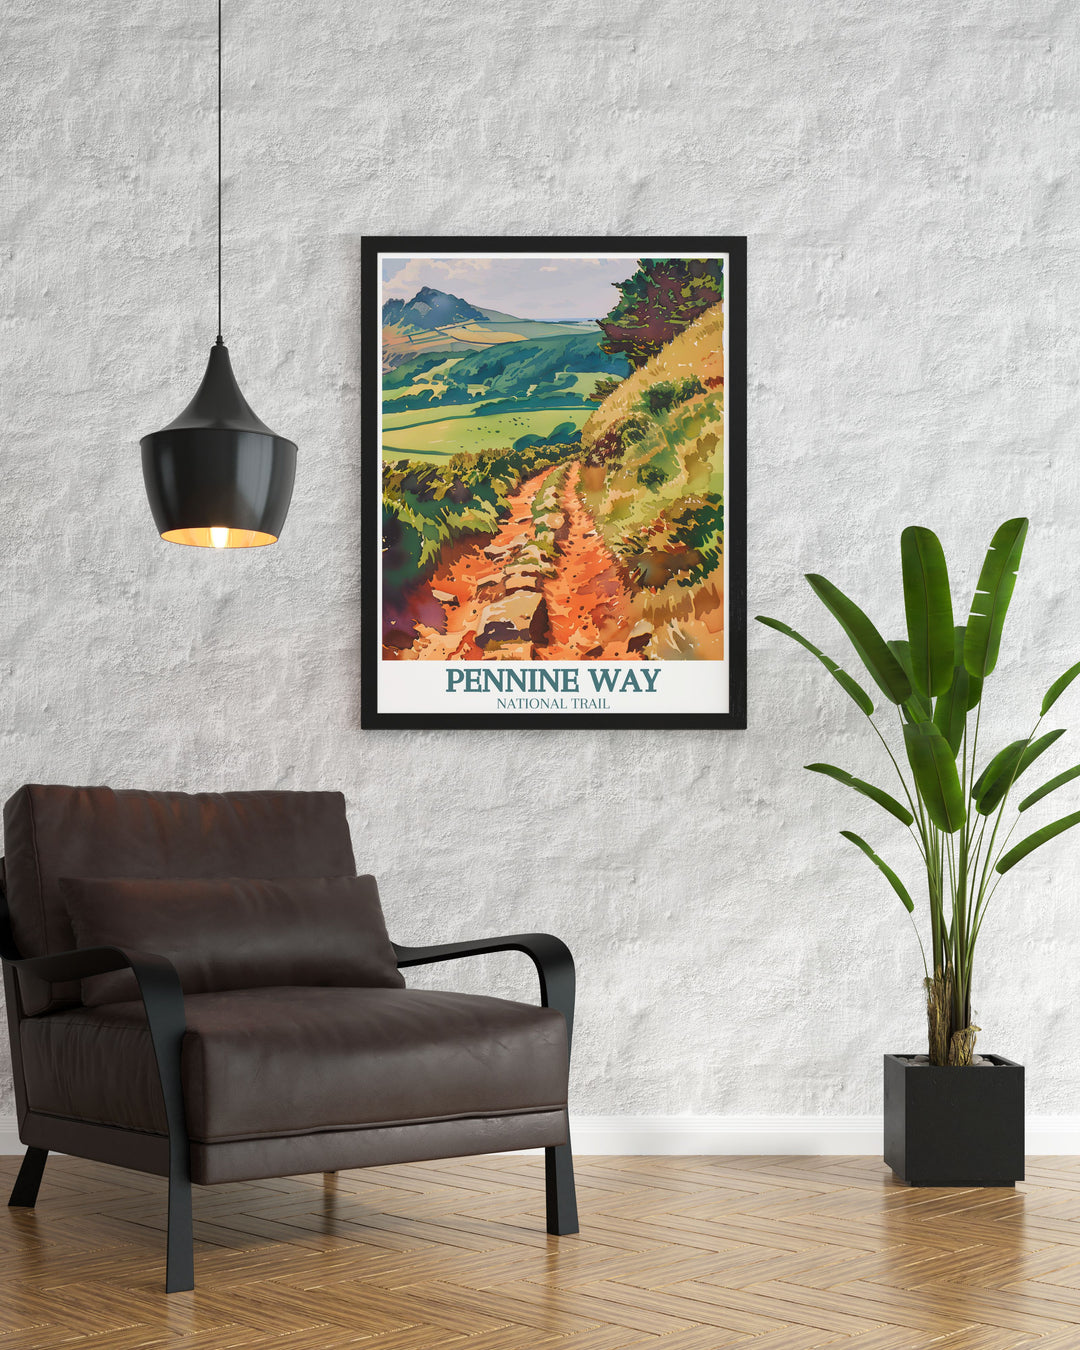 UK Travel Poster featuring the stunning vistas of the Pennines perfect for adventurers and those who appreciate the beauty of UK National Parks and the Yorkshire Dales